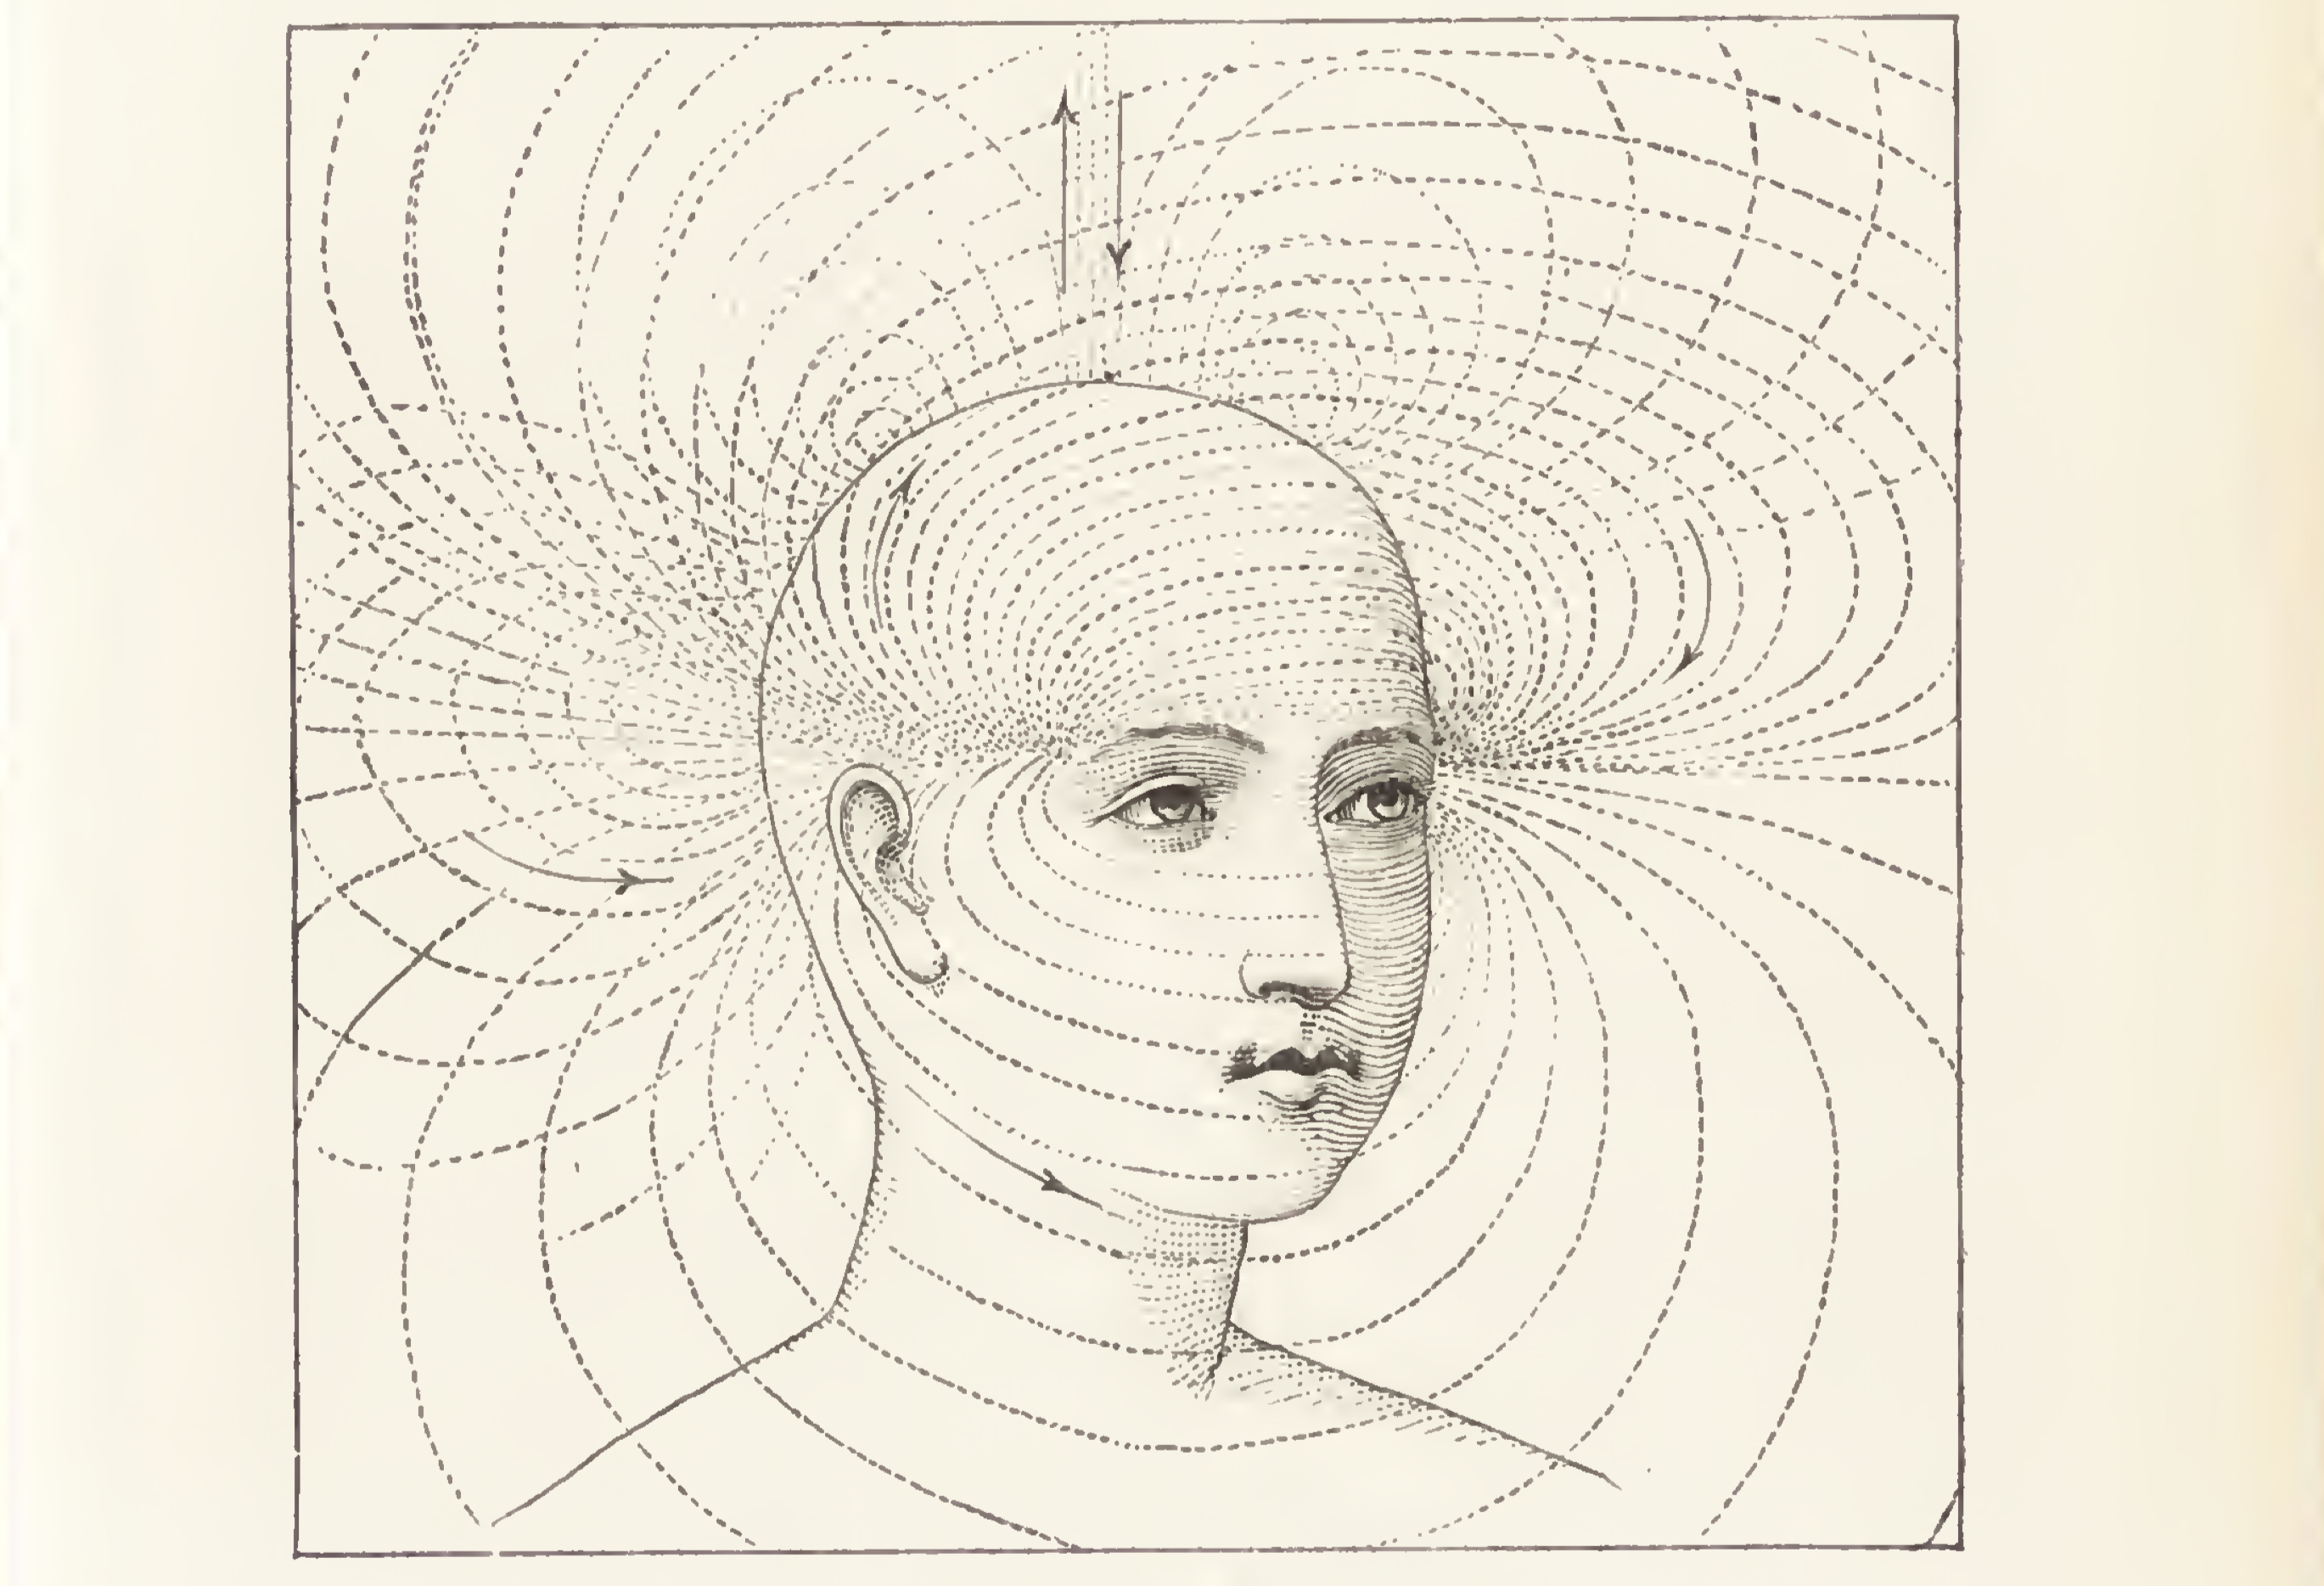 Black-and-white illustration of a person, seen from the neck up, androgynous and bald, with curved lines indicating some kind of magnetic field or lines of energy surrounding and crossing the head.